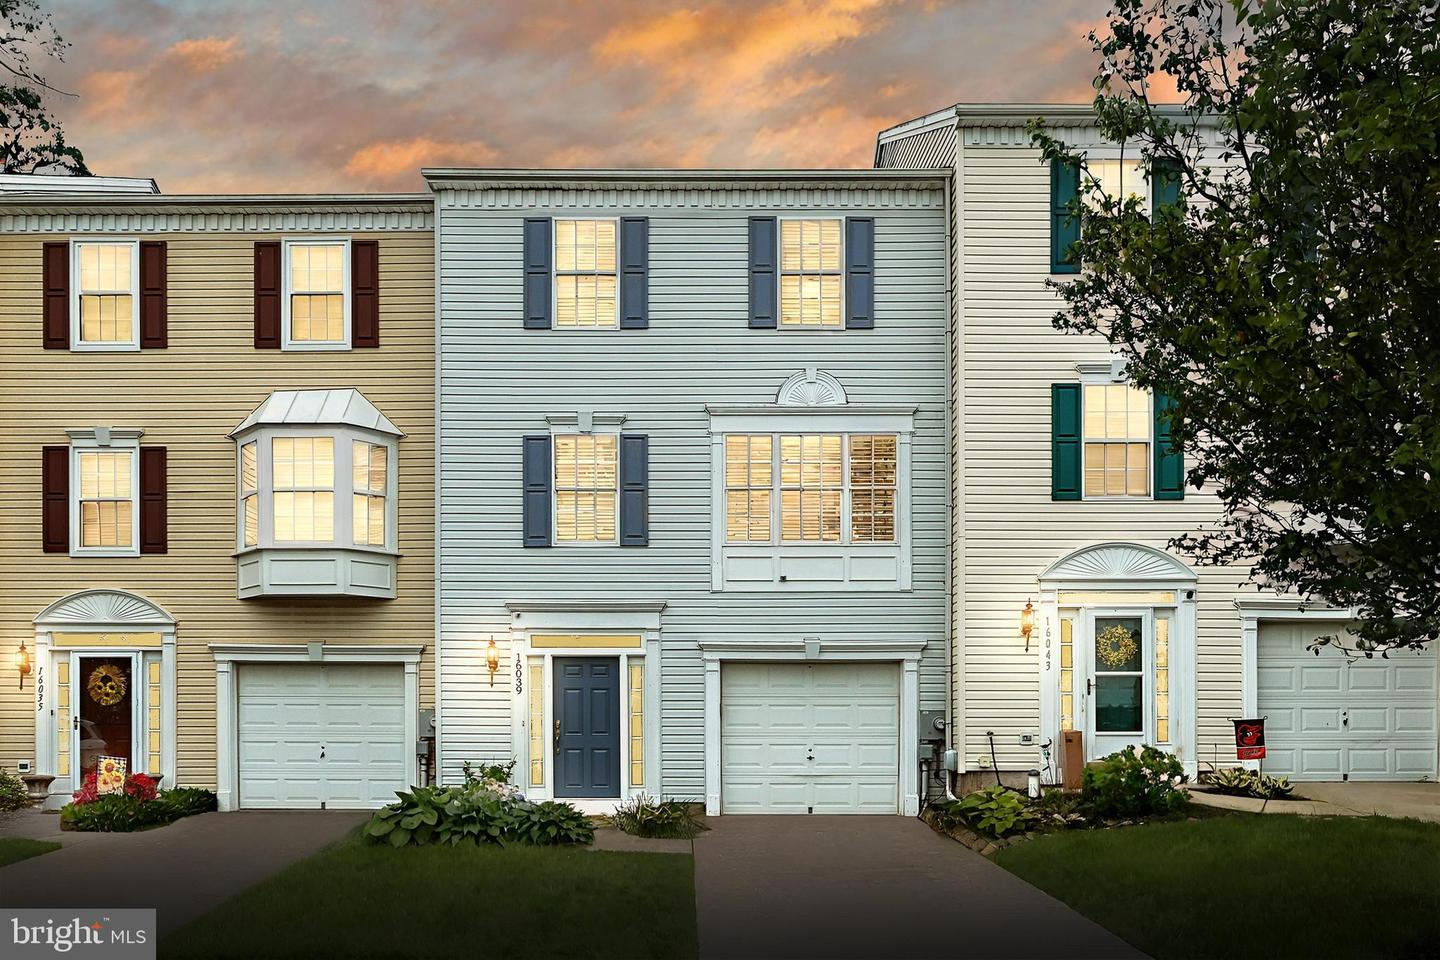 View New Freedom, PA 17349 townhome